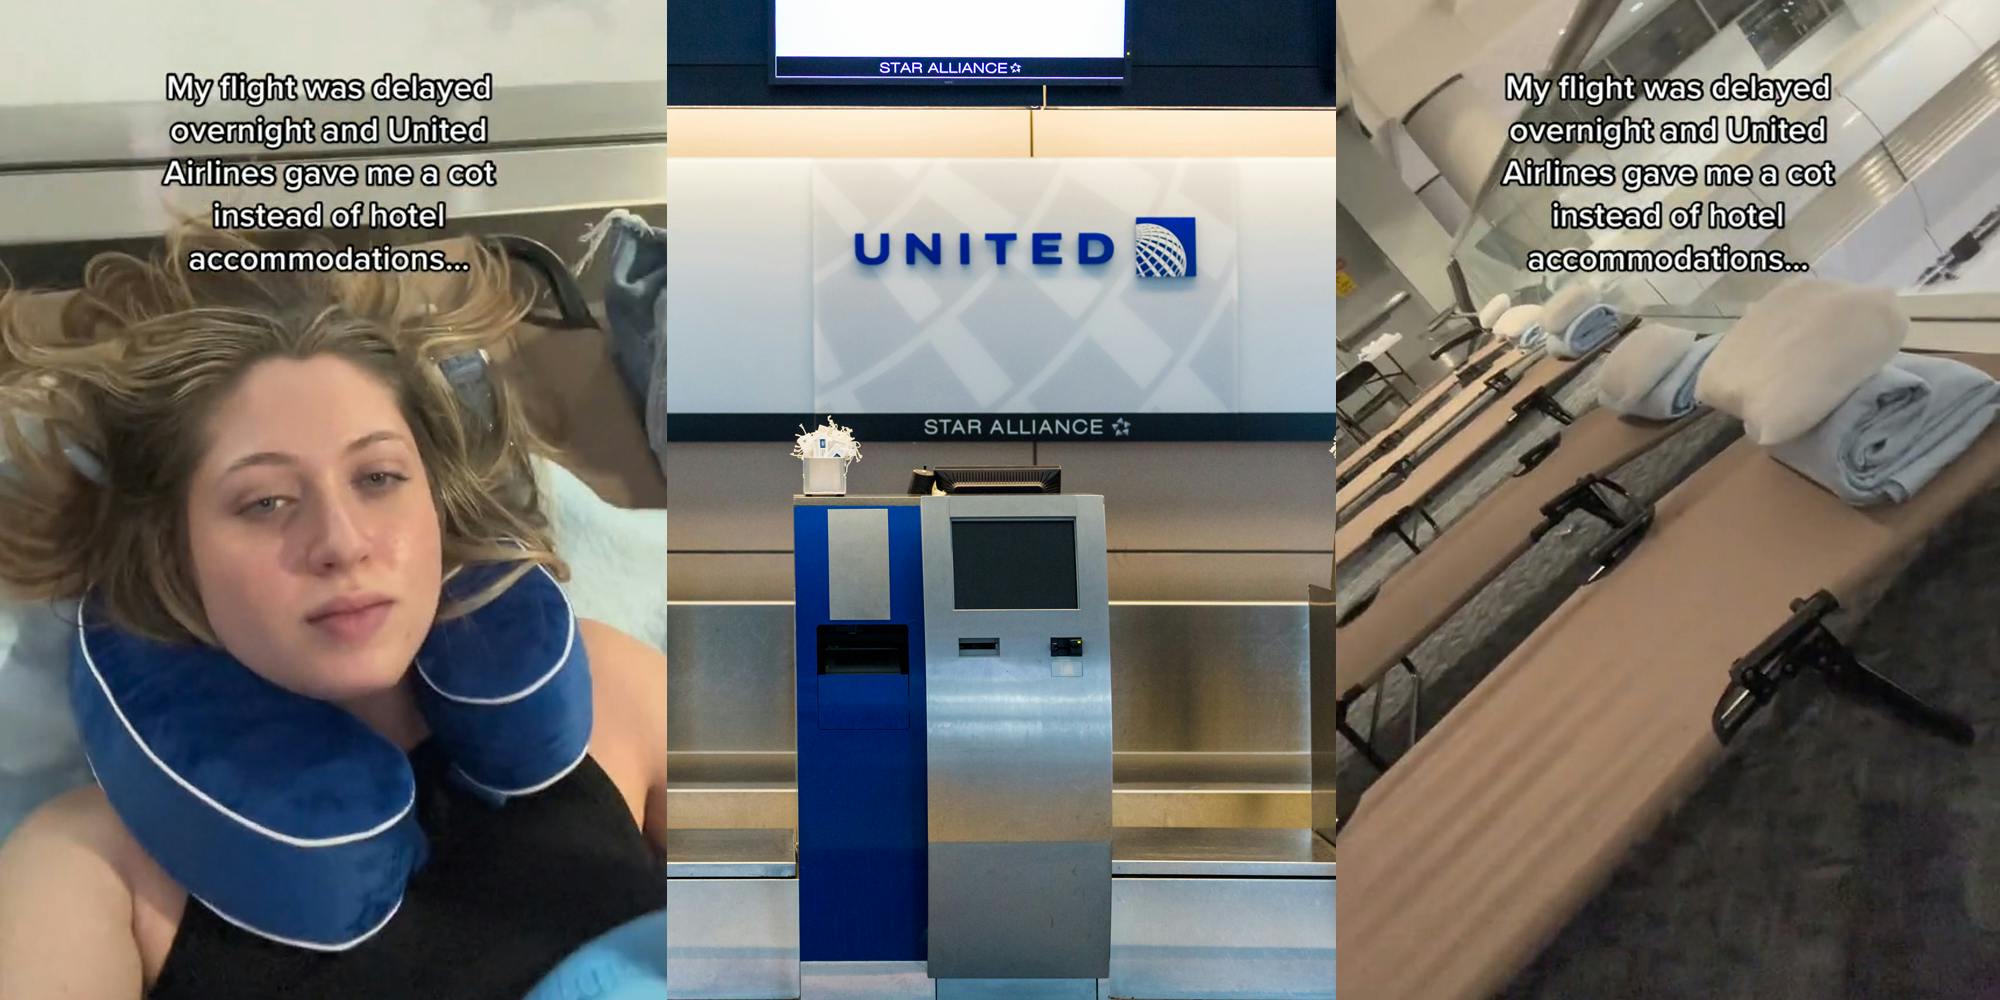 United Airlines customer with caption "My flight was delayed overnight and United Airlines gave me a cot instead of hotel accommodations" (l) United Airlines sign inside on wall (c) United Airlines cots lined up with caption "My flight was delayed overnight and United Airlines gave me a cot instead of hotel accommodations" (r)